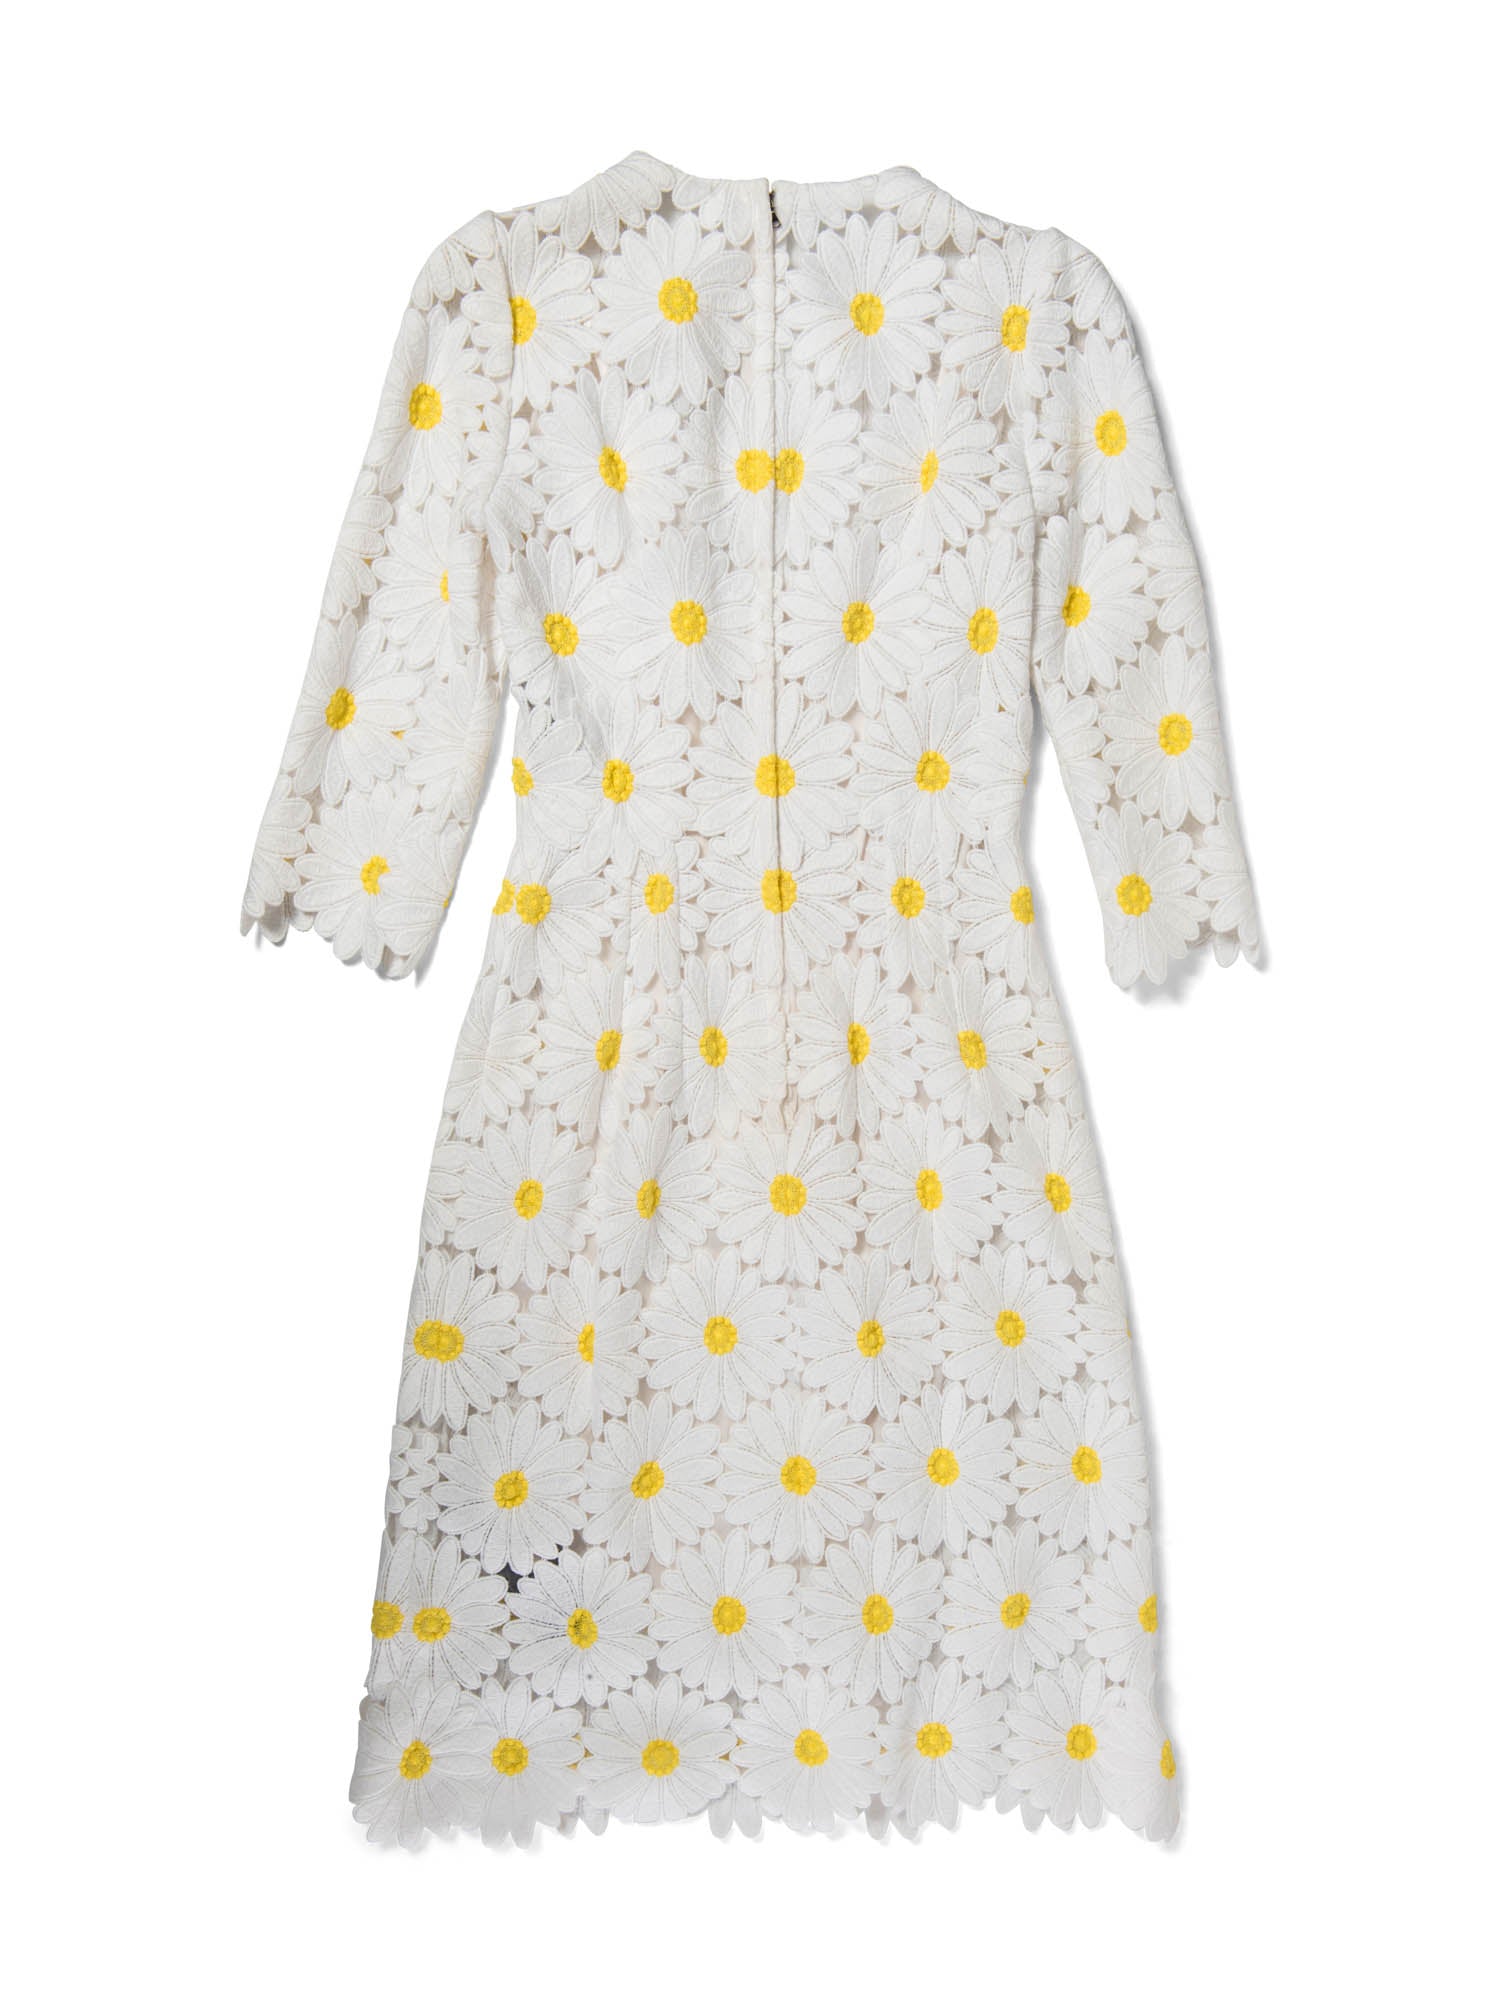 Dolce & Gabbana Embroidered Daisy Midi Fitted Dress White Yellow